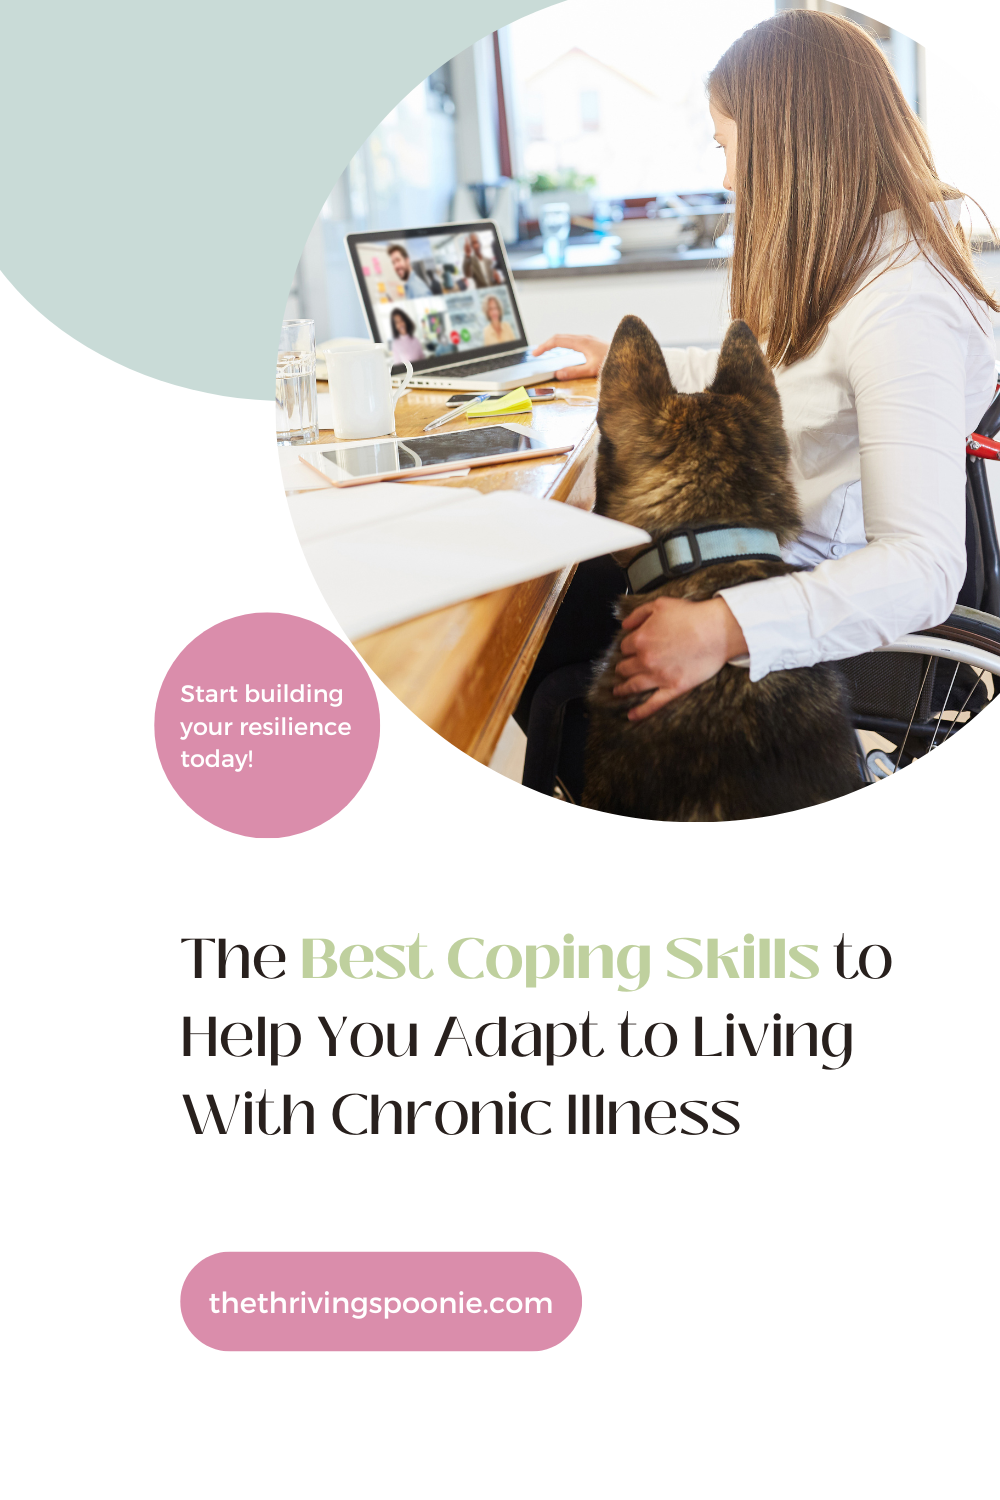 The Best Coping Skills to Help You Adapt to Living With Chronic Illness